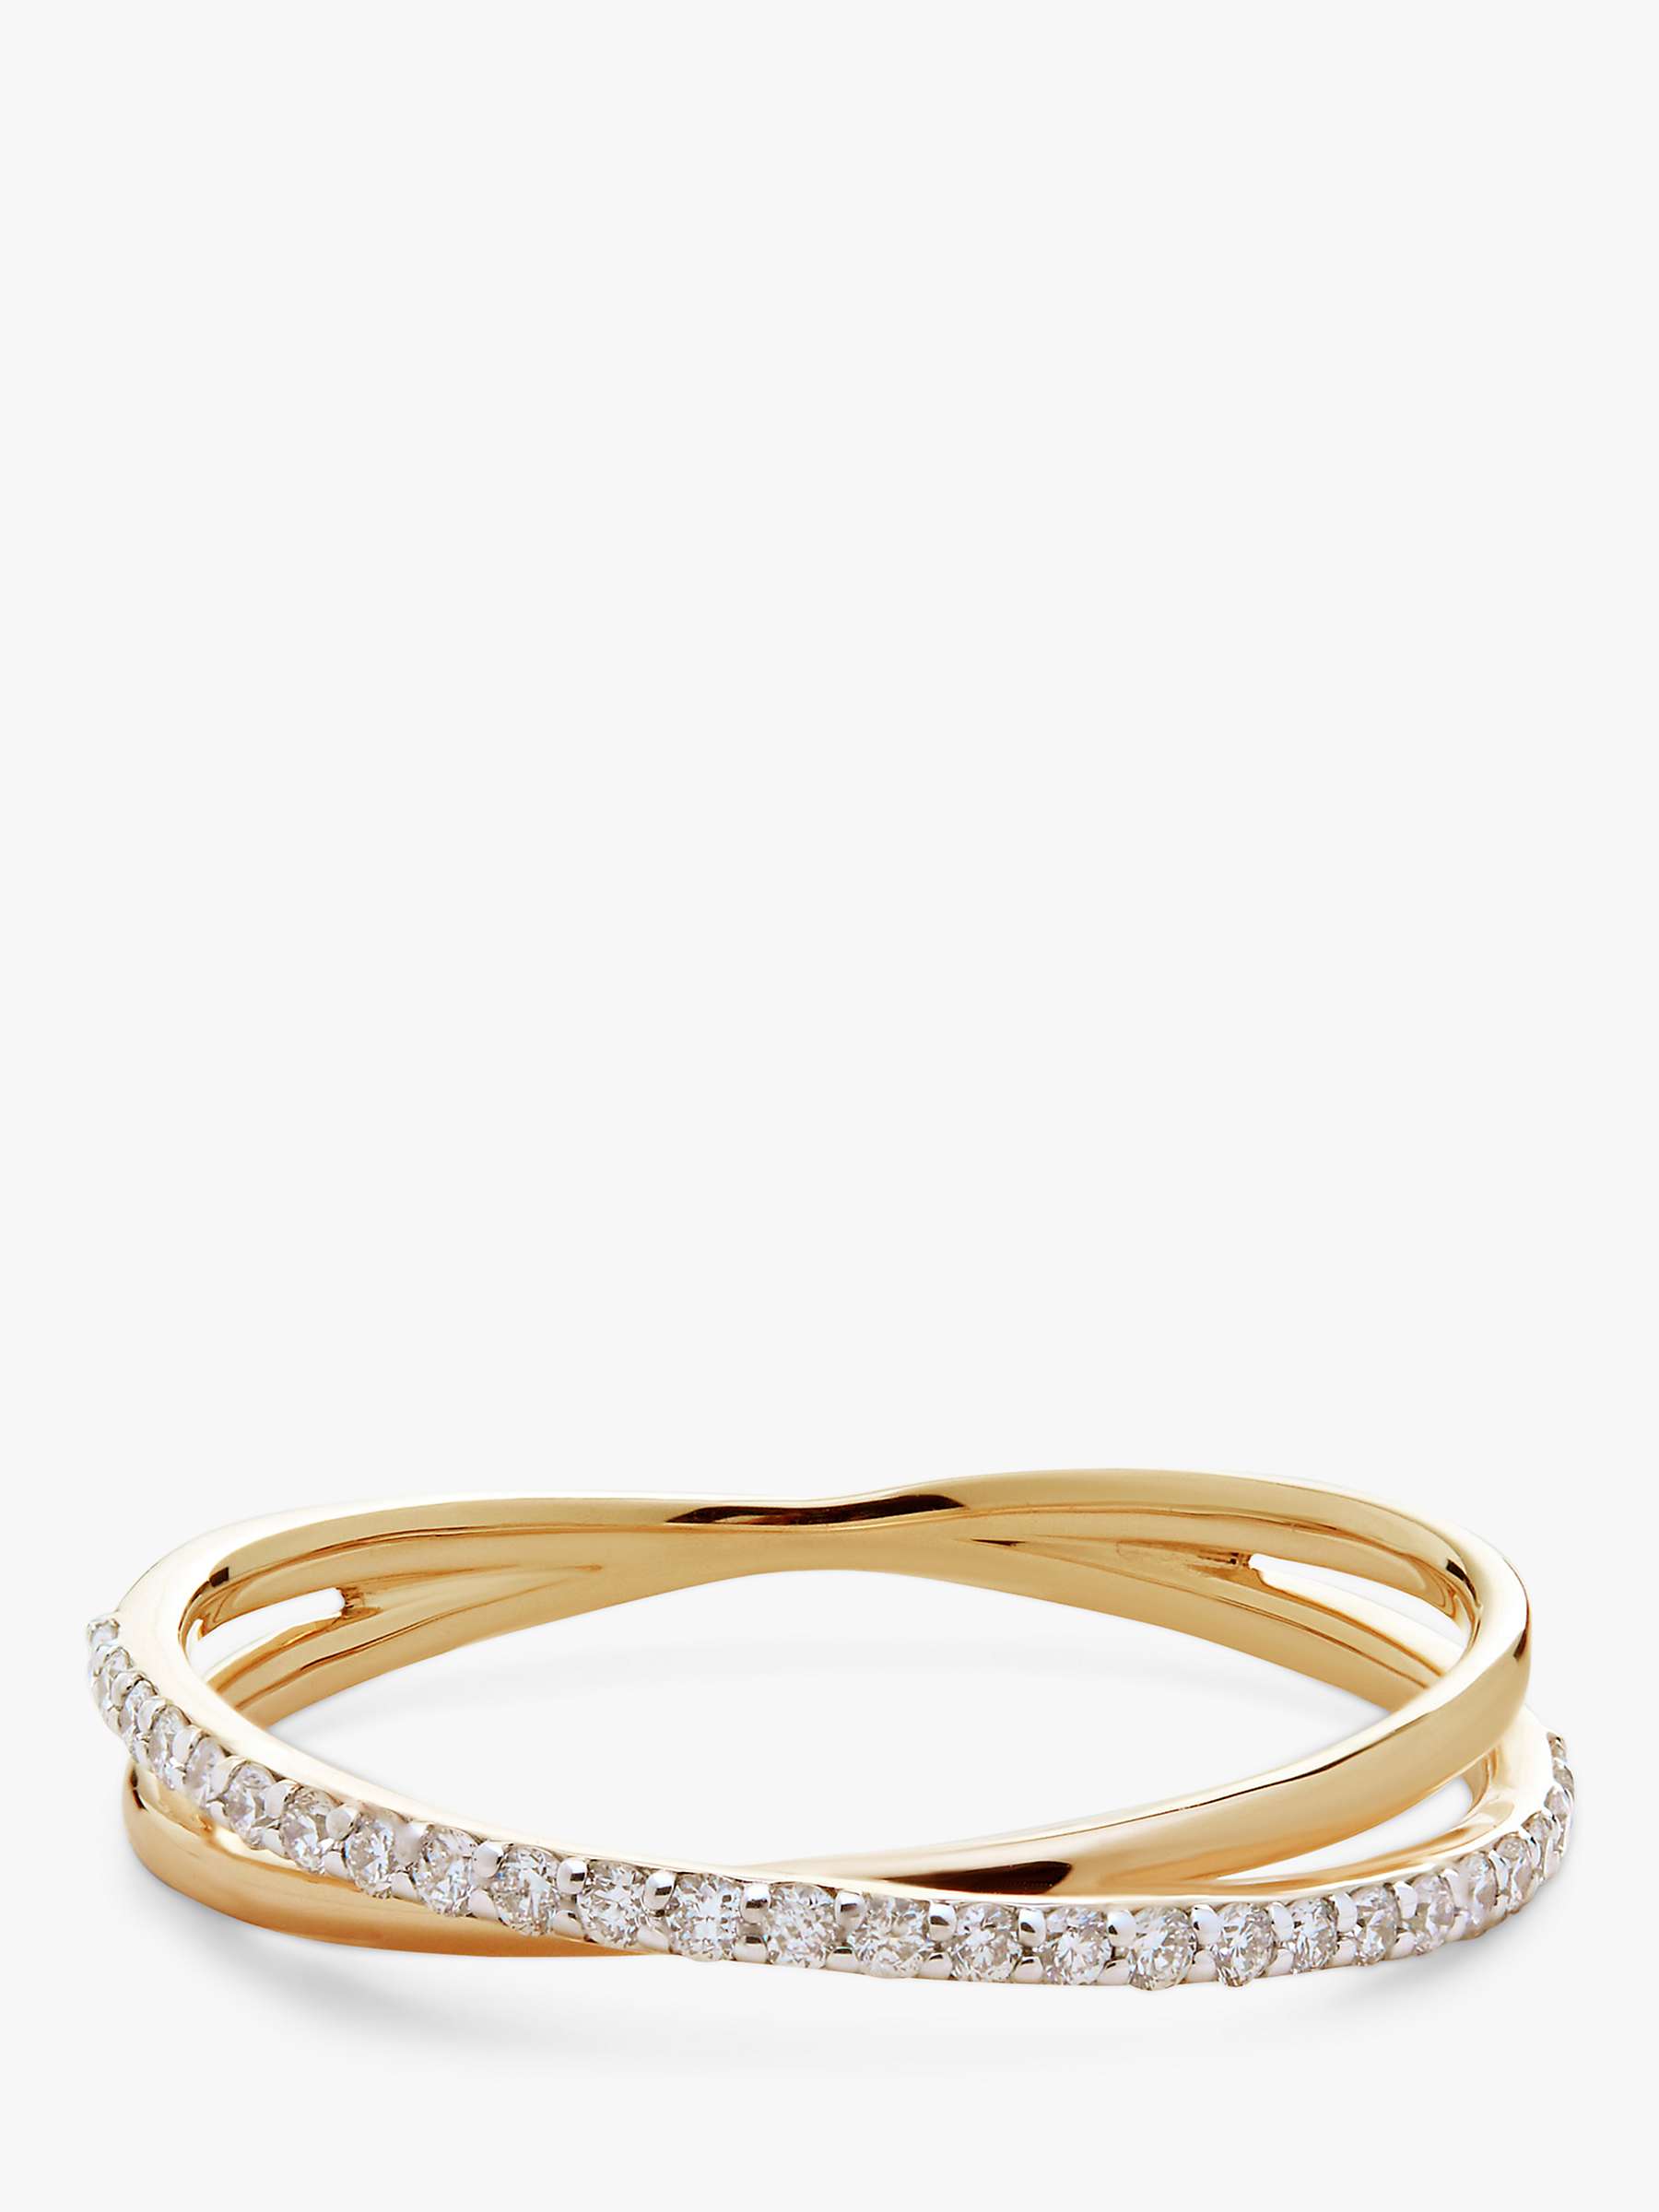 Buy Monica Vinader 14ct Yellow Gold Diamond Cross Over Ring, Gold Online at johnlewis.com